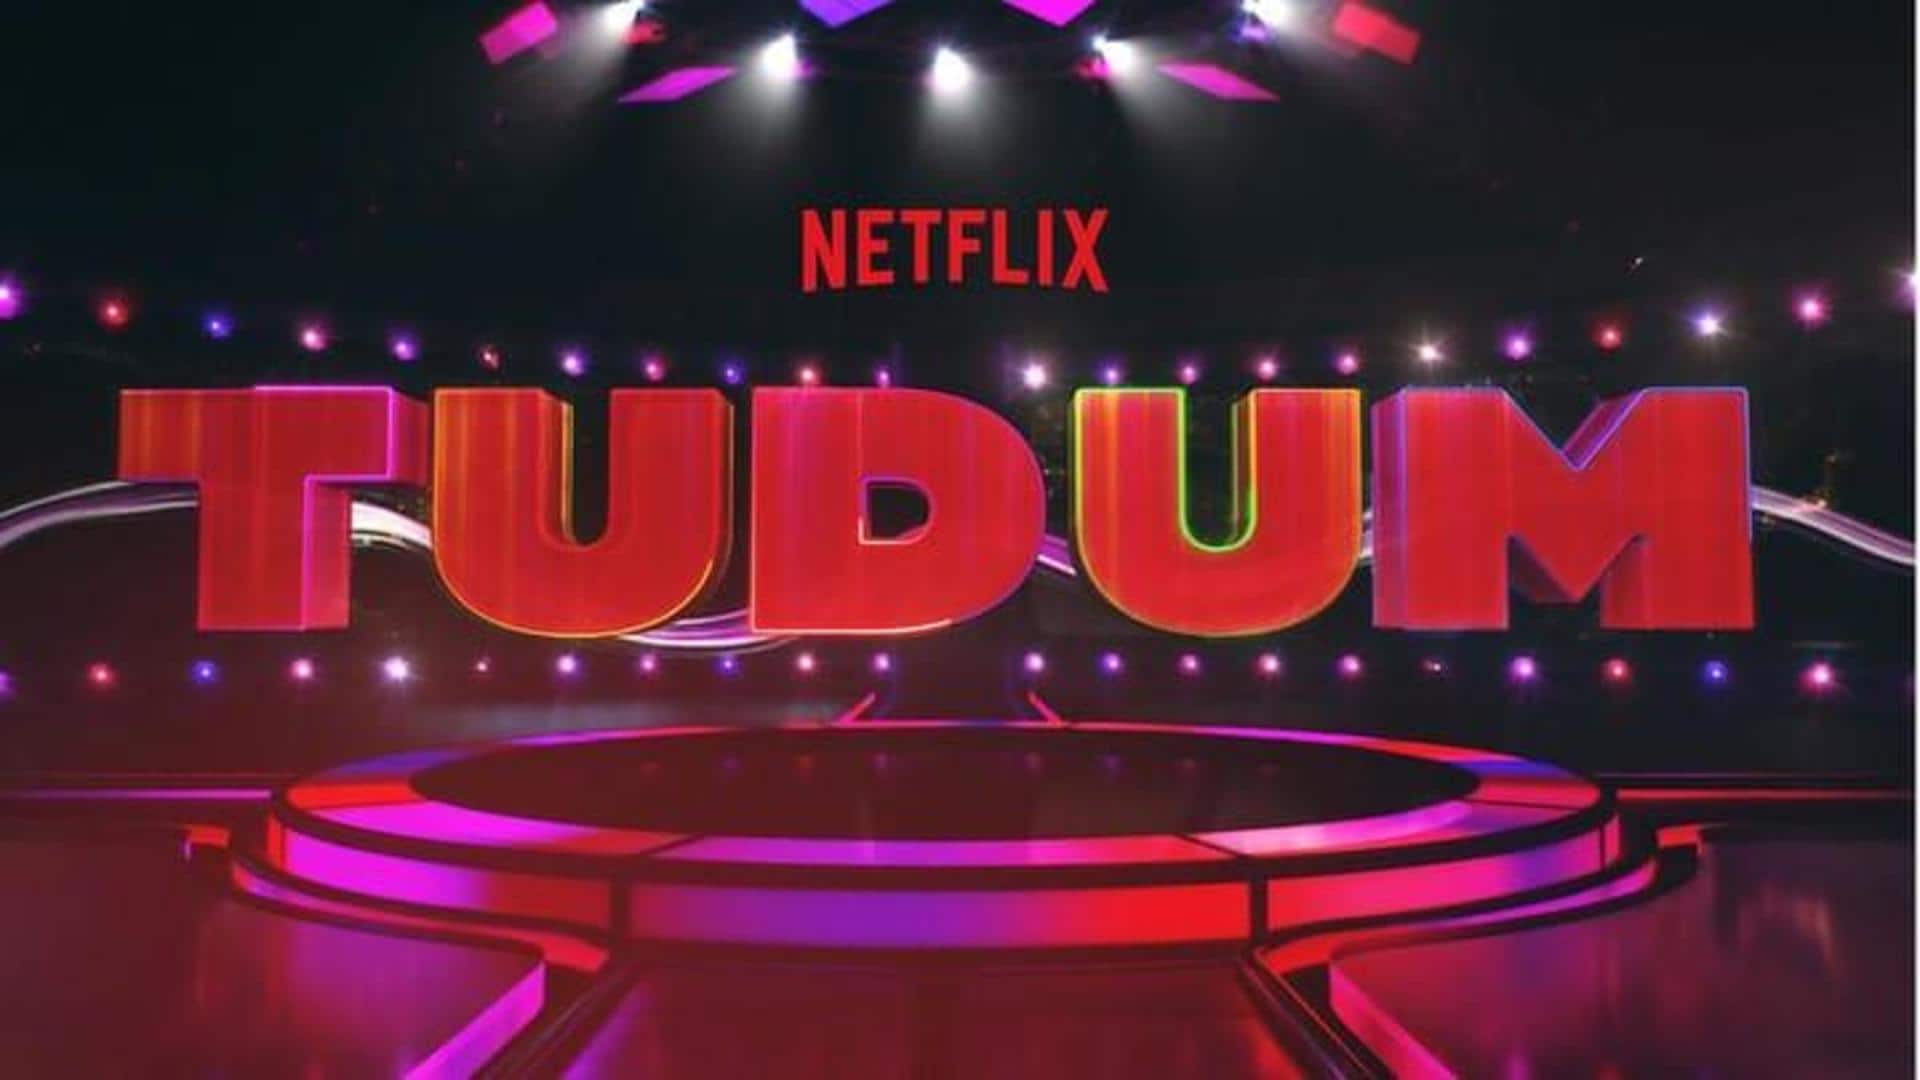 Netflix Tudum will take place in San Paolo, Brasil on 17 June